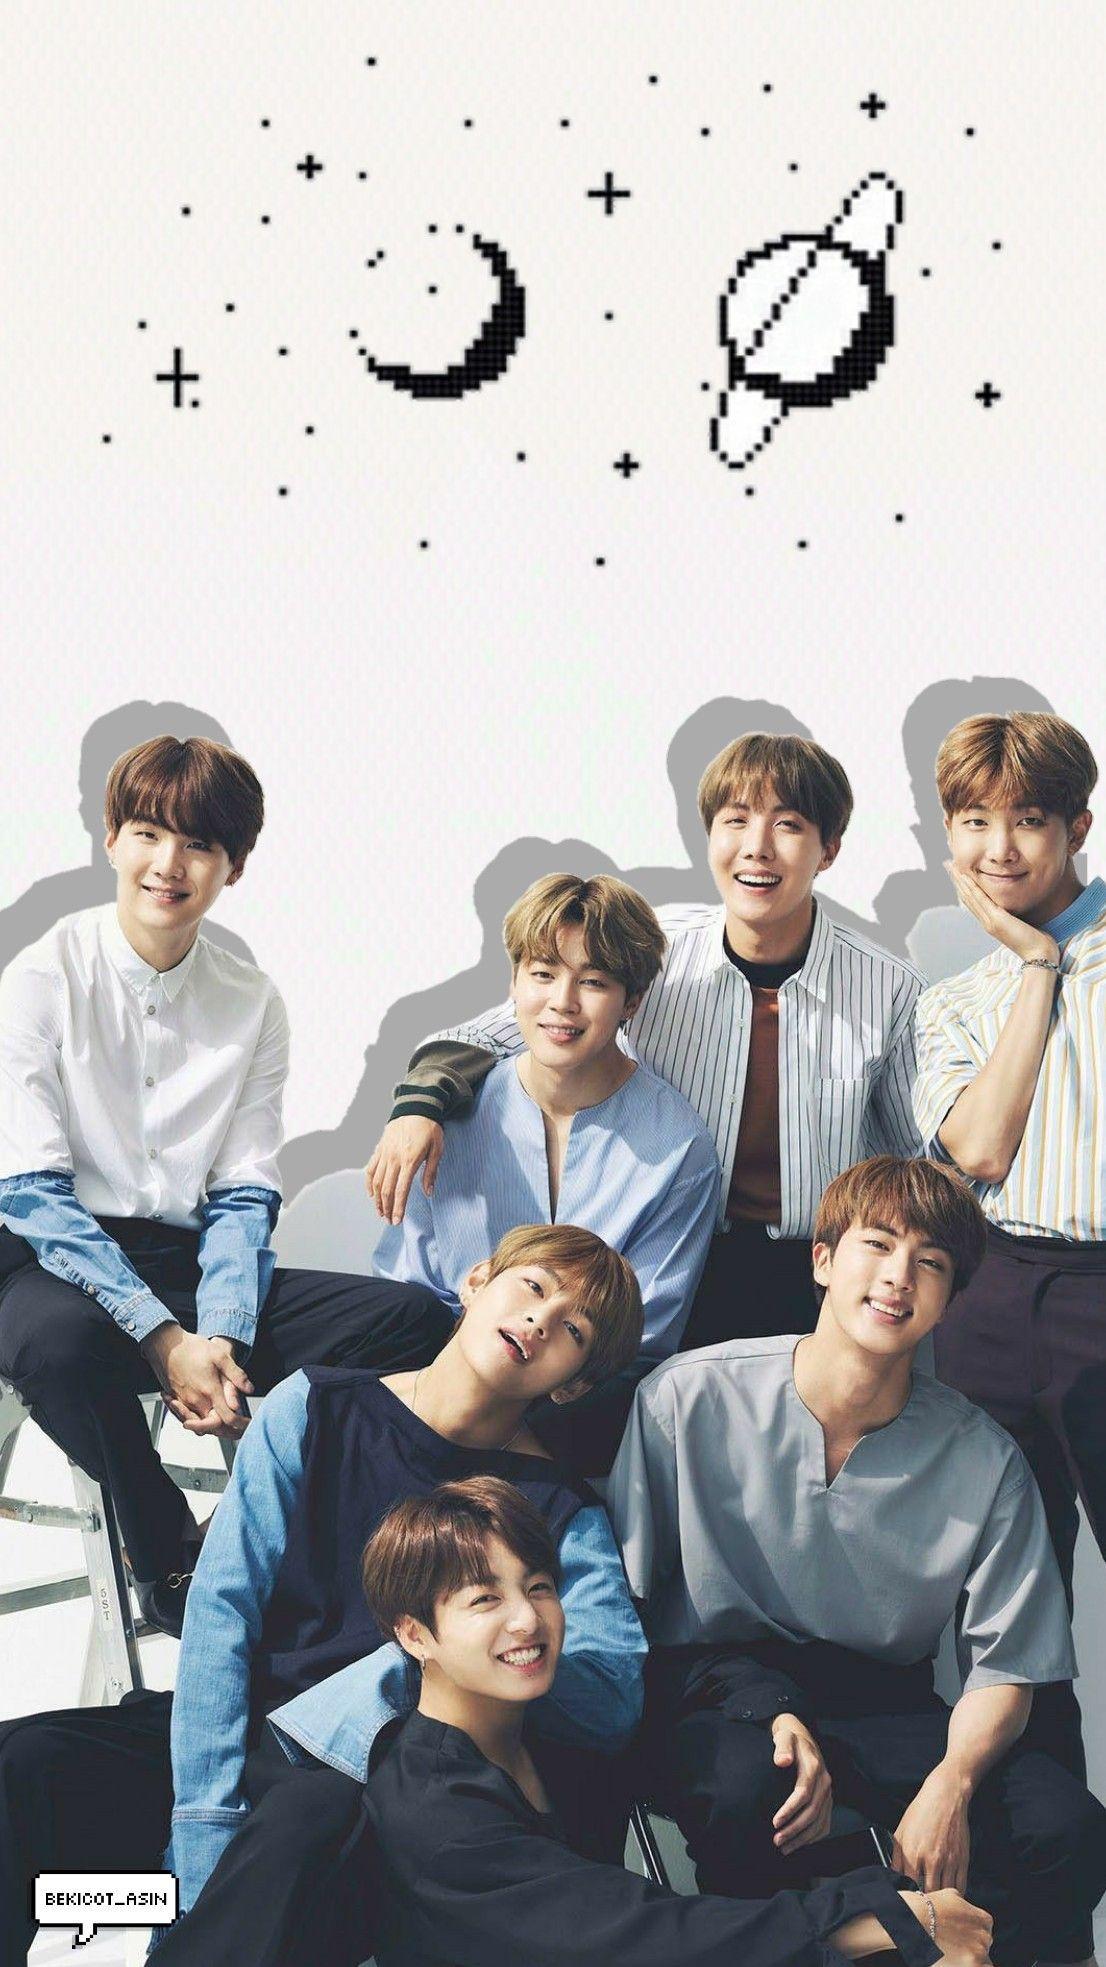 Comment save if you want to save #bts #wallpaper #lockscreen